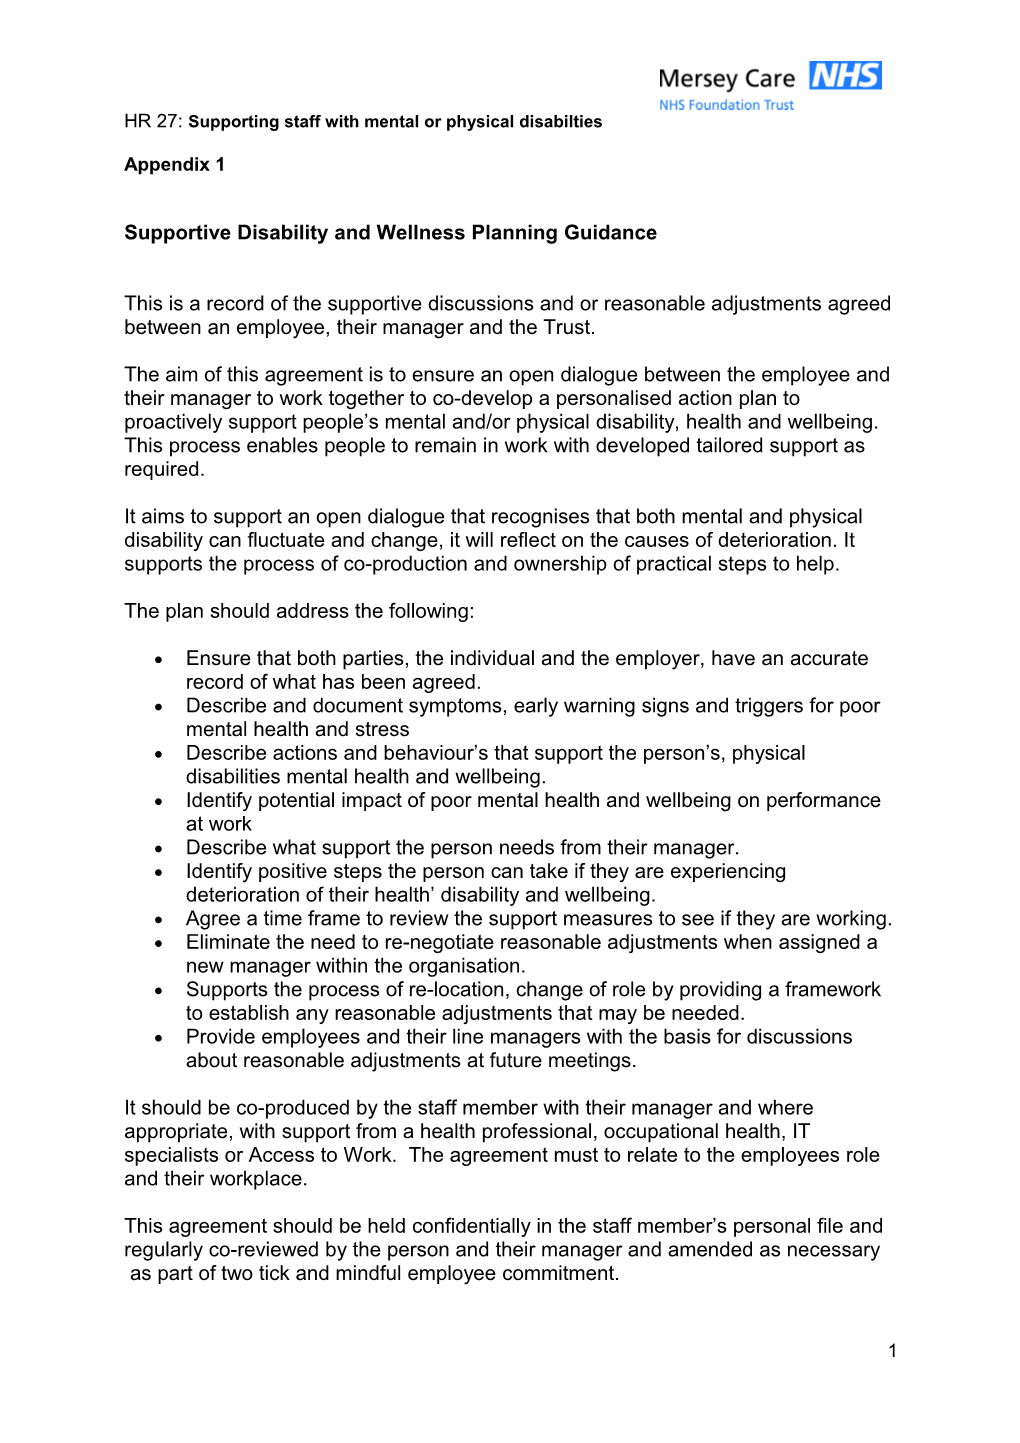 Supportive Disability and Wellness Planning Guidance